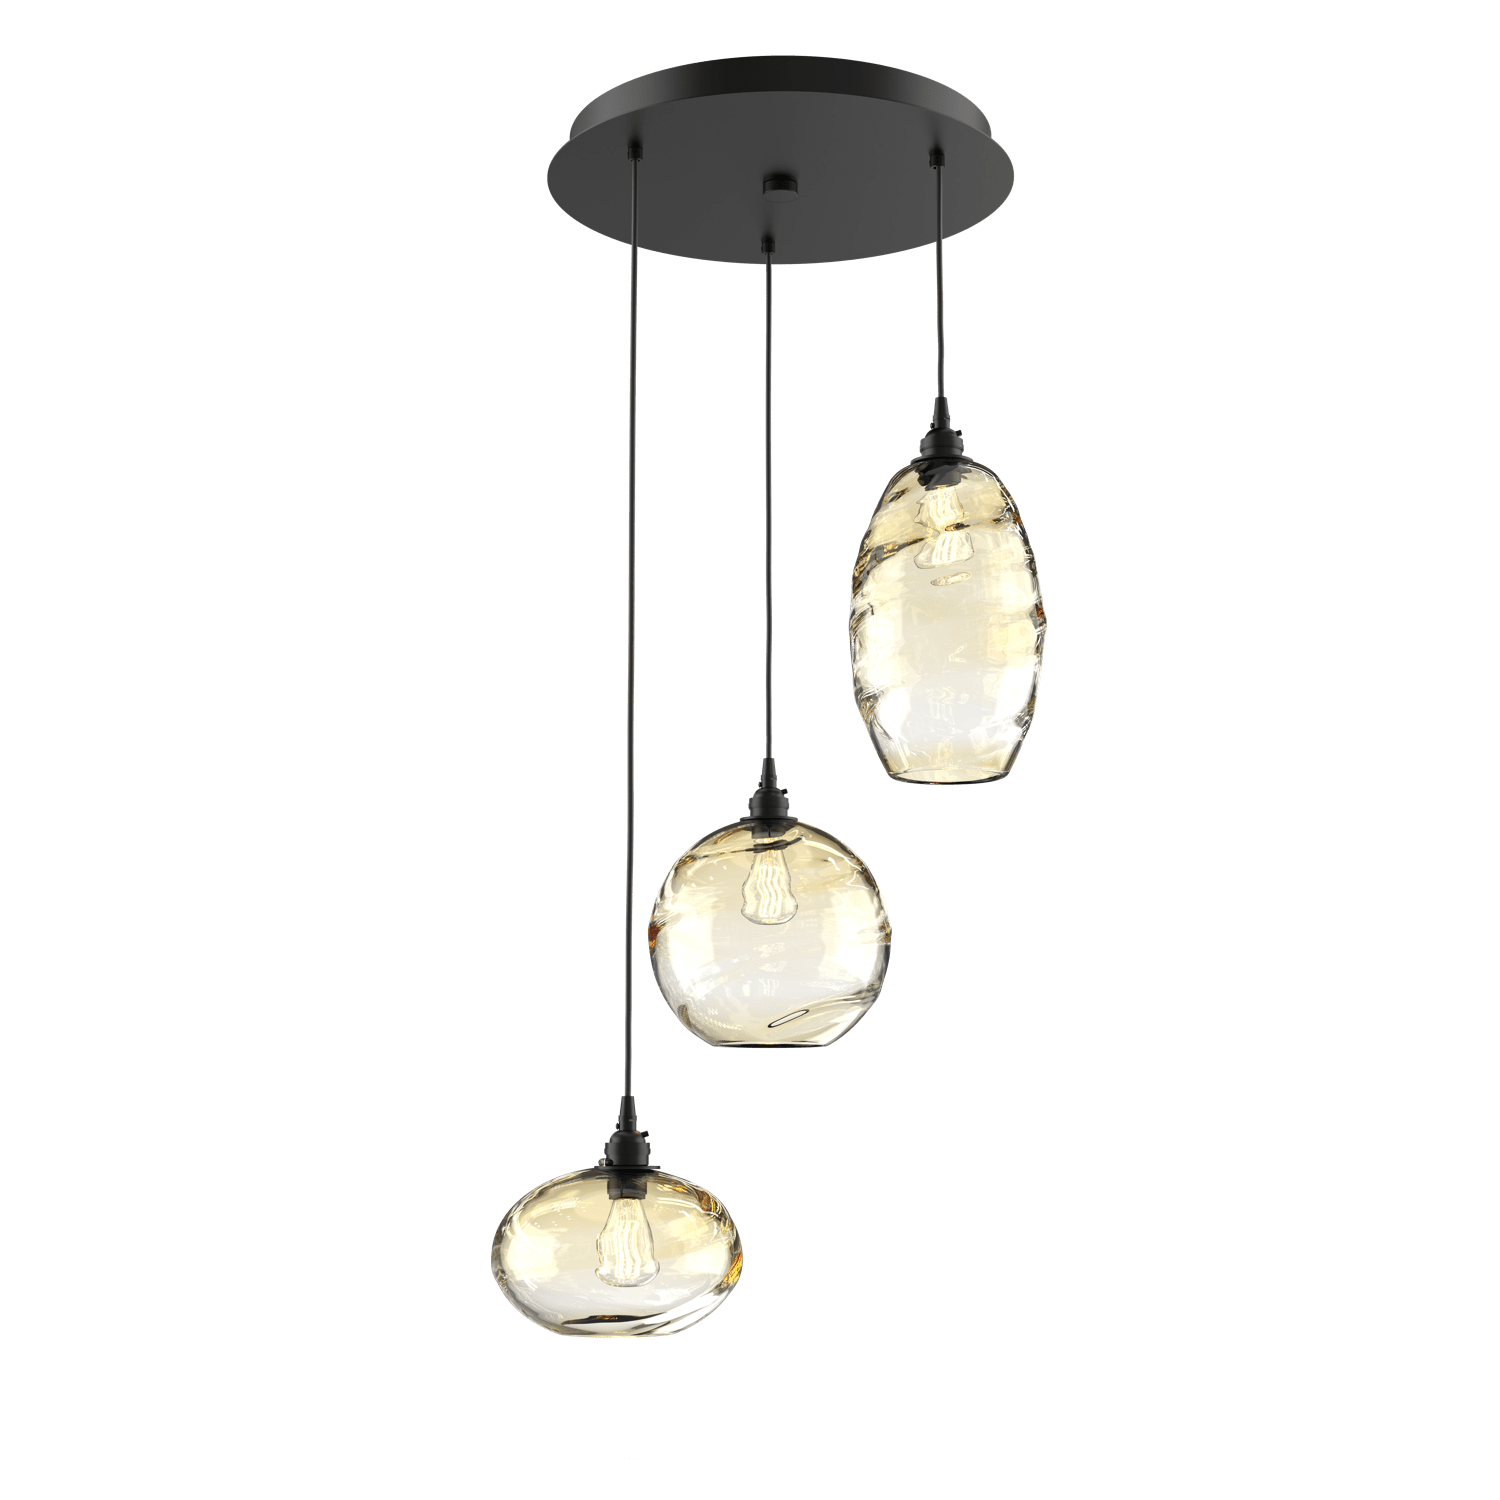 CHB0048-03-MB-OA-Hammerton-Studio-Optic-Blown-Glass-Misto-3-light-round-pendant-chandelier-with-matte-black-finish-and-optic-amber-blown-glass-shades-and-incandescent-lamping